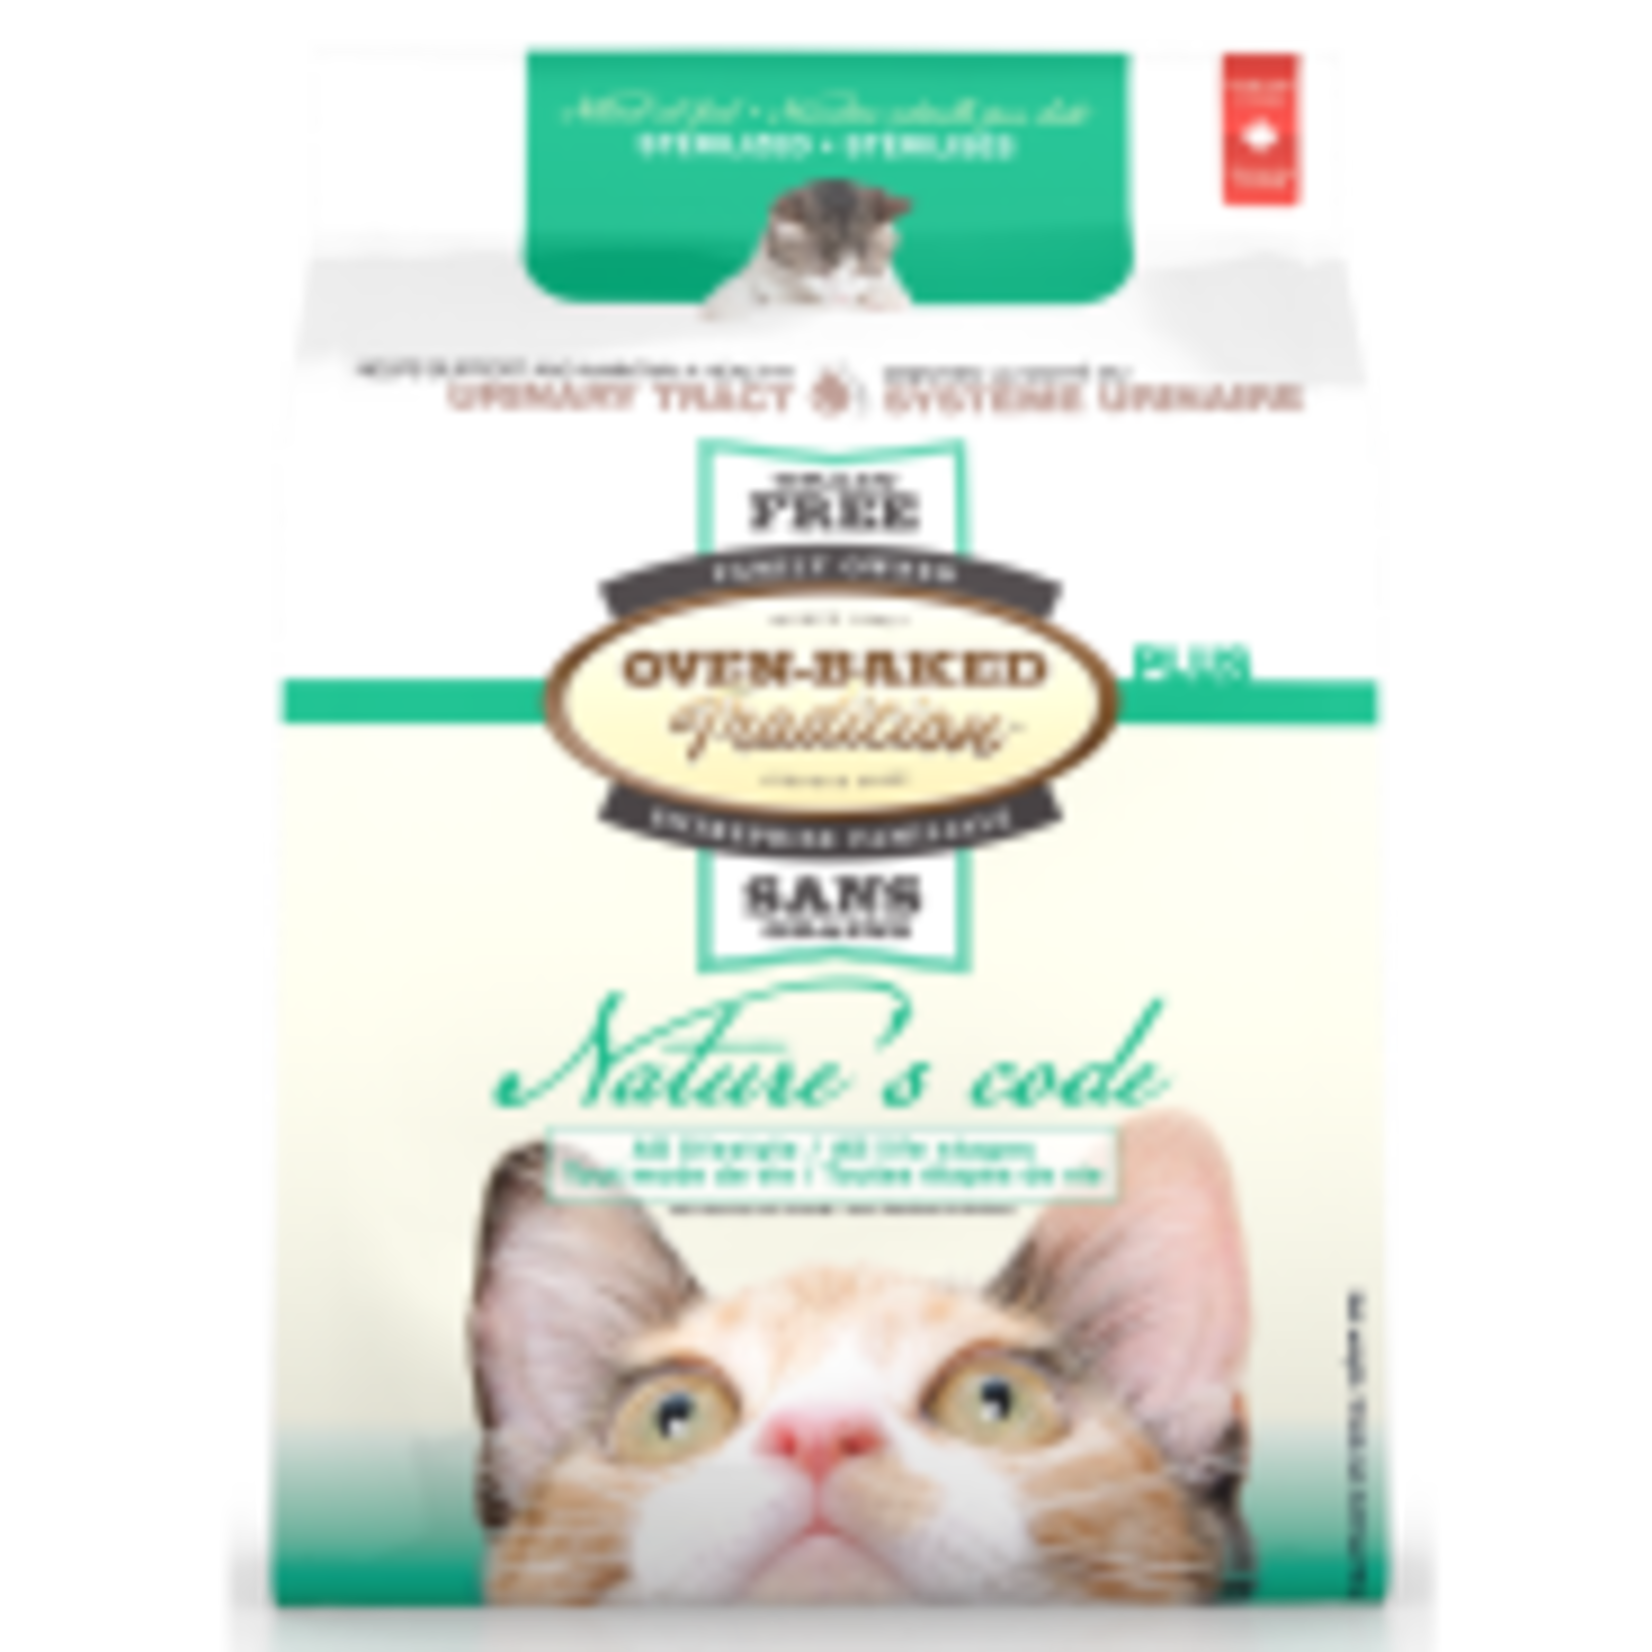 Nature's Code OBT Nature's Code Cat Urinary Tract